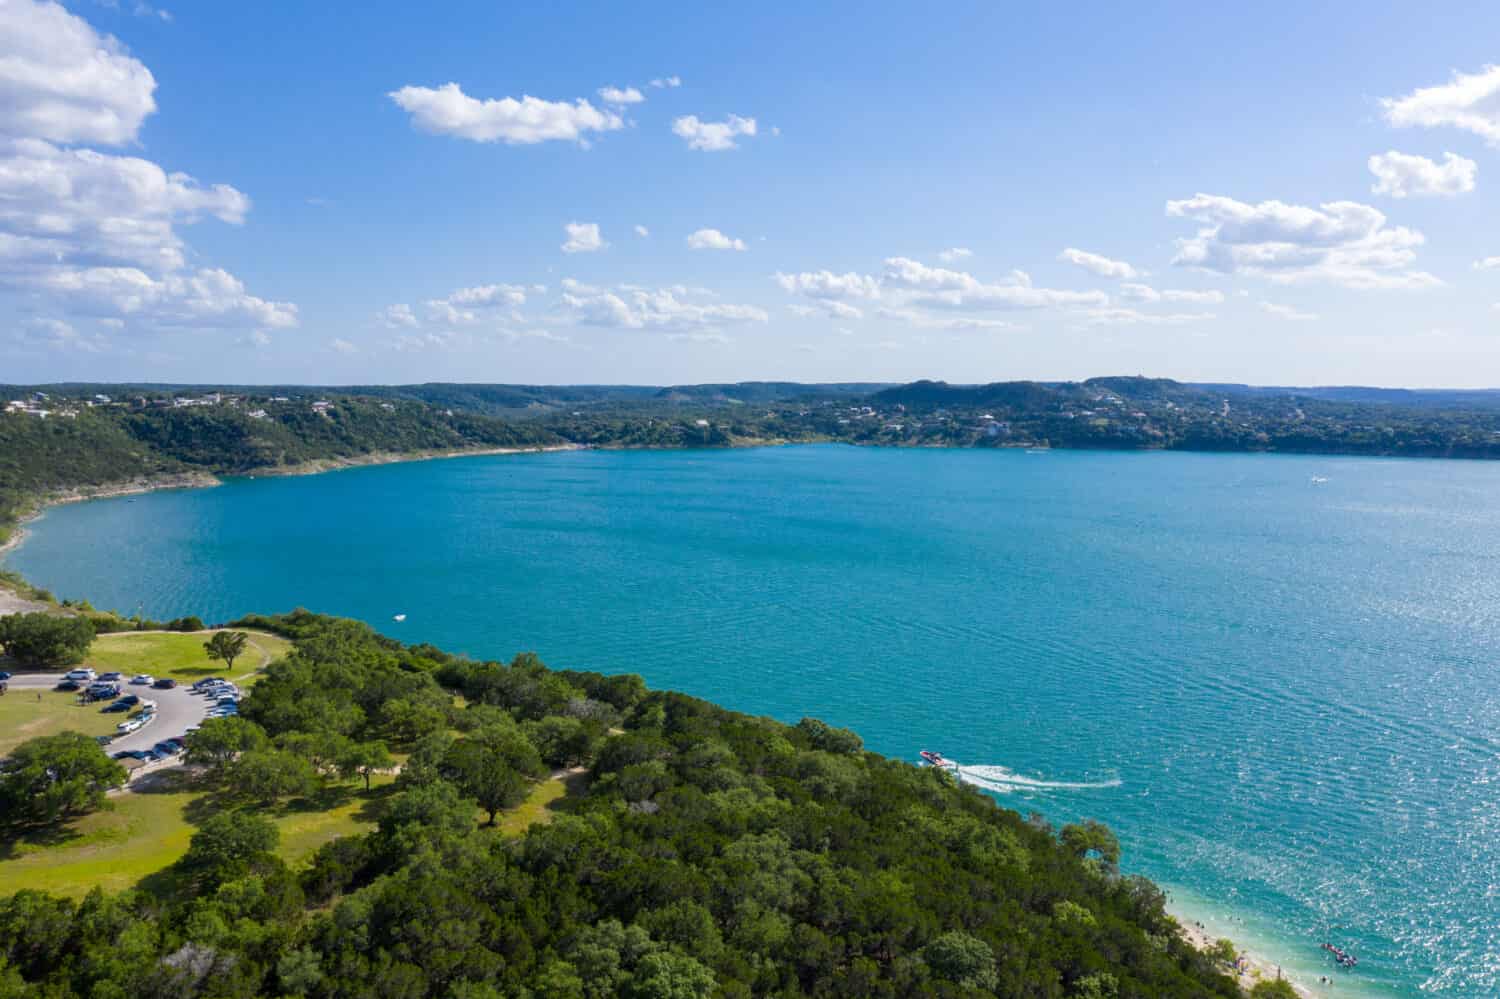 Aerial view of Canyon Lake, showcasing its scenic beauty and surrounding landscape in the Texas Hill Country.